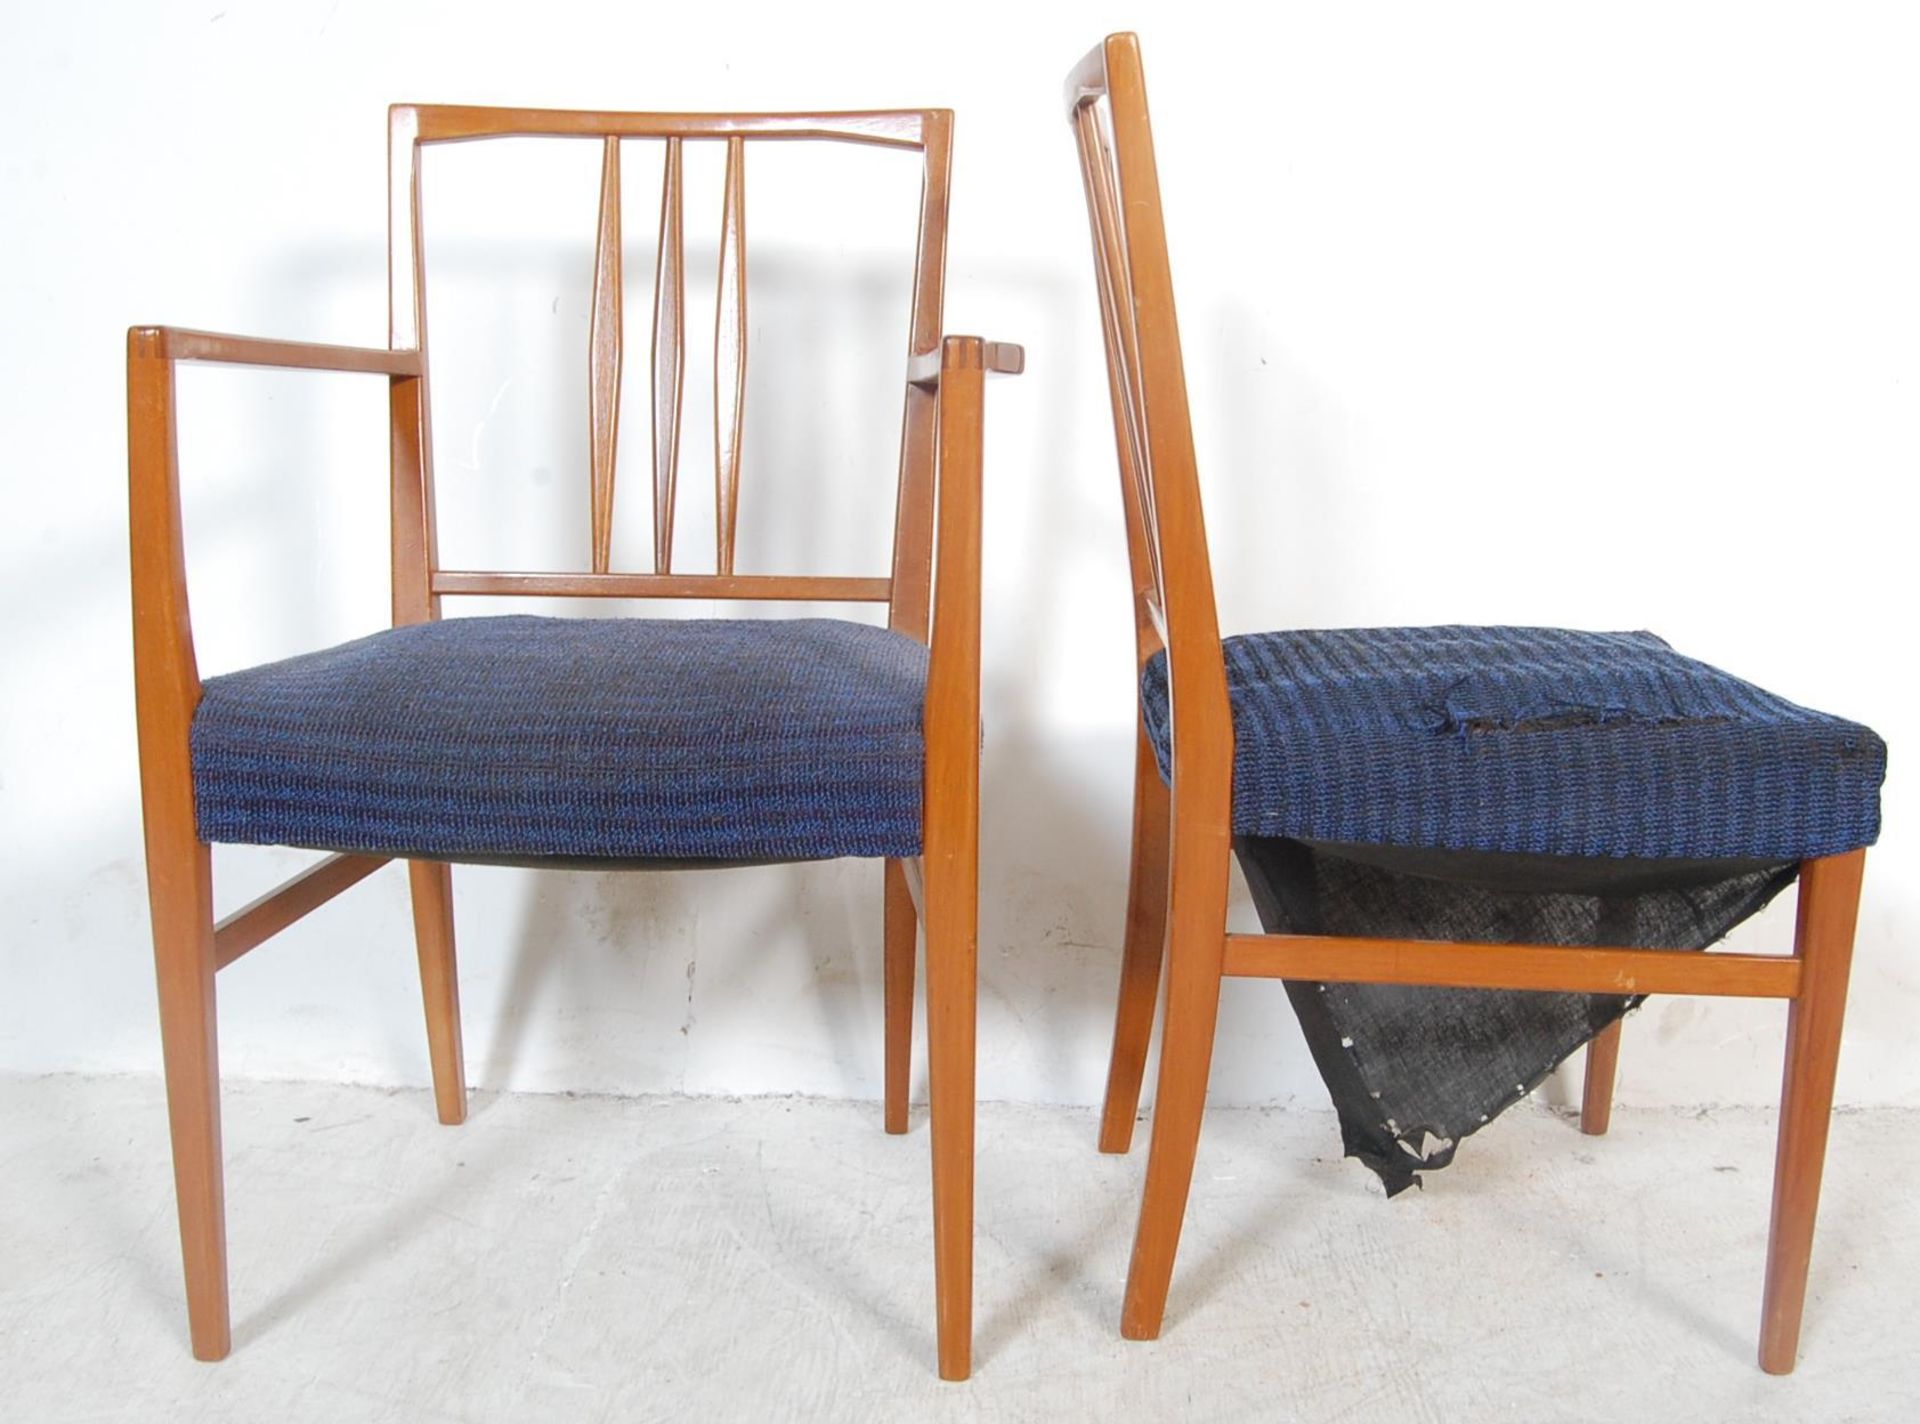 SIX MID CENTURY GORDON RUSSELL DINING CHAIRS - Image 3 of 4